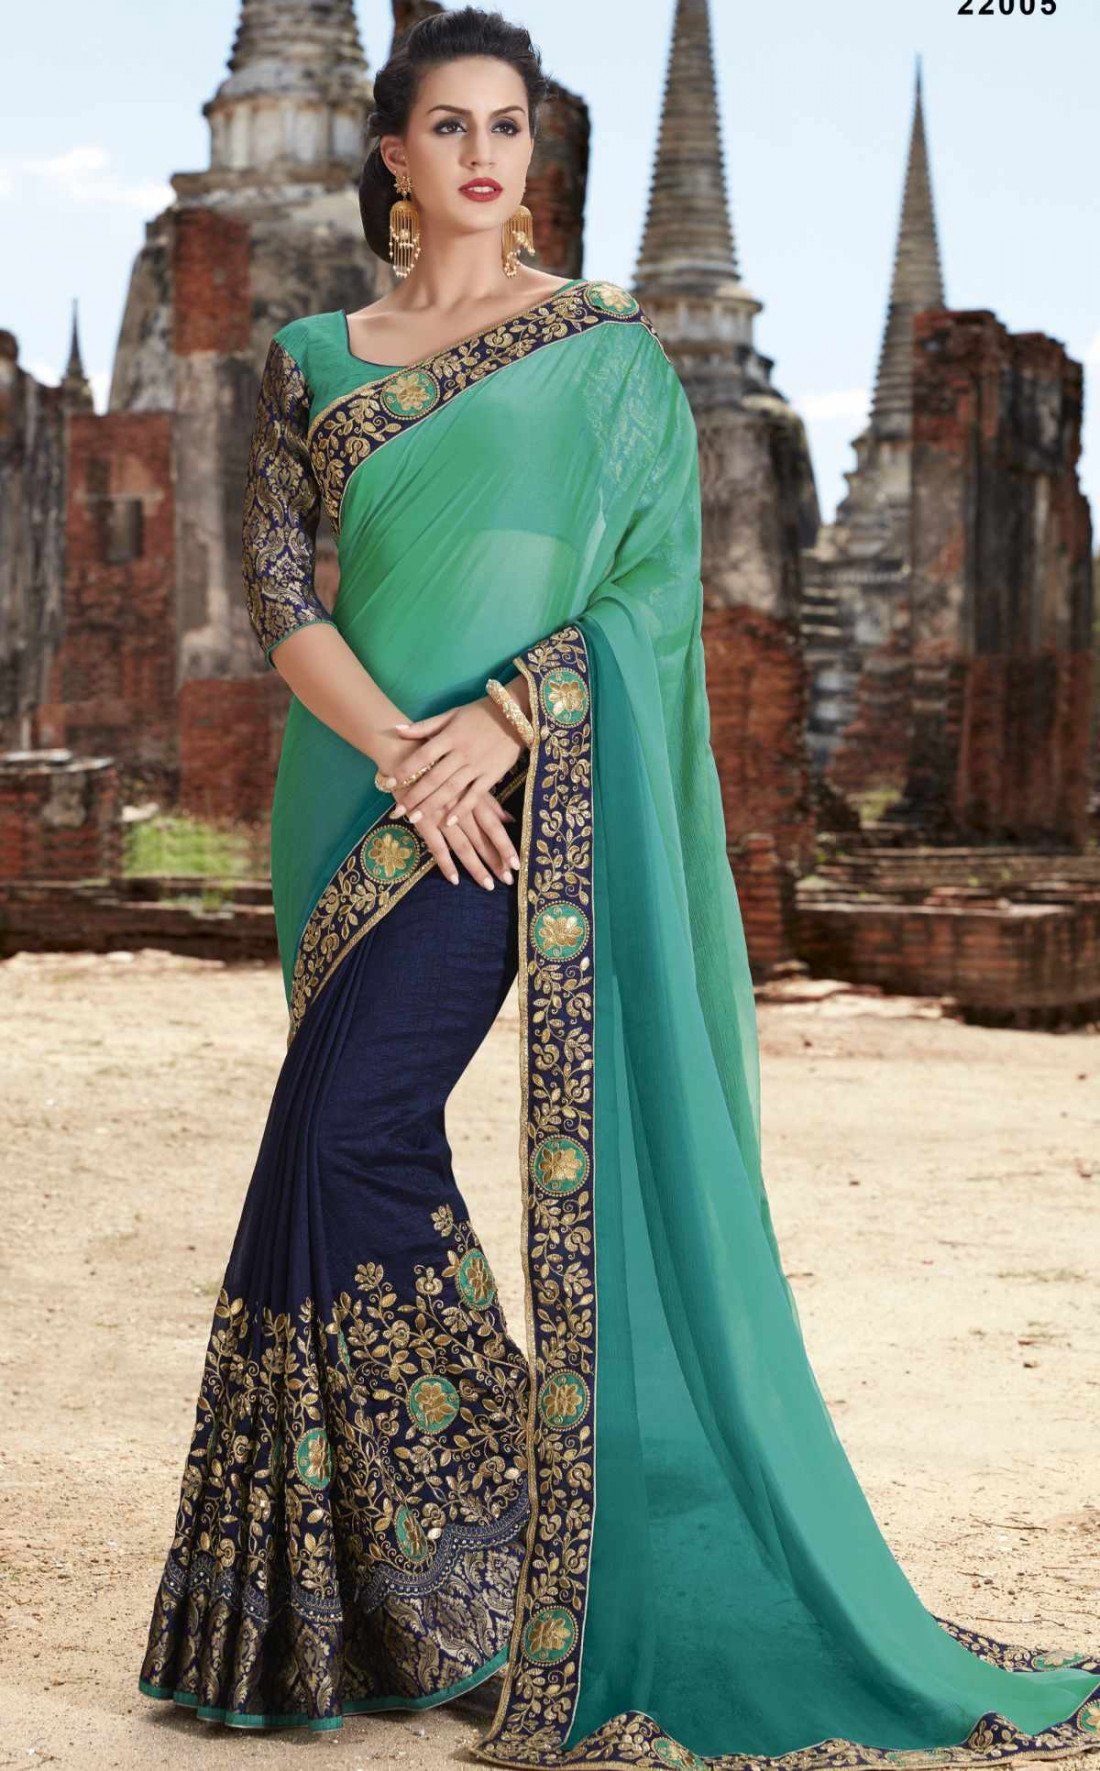 Dark nevy and teal half-half chiffon saree - Indian Clothing in Denver, CO, Aurora, CO, Boulder, CO, Fort Collins, CO, Colorado Springs, CO, Parker, CO, Highlands Ranch, CO, Cherry Creek, CO, Centennial, CO, and Longmont, CO. Nationwide shipping USA - India Fashion X